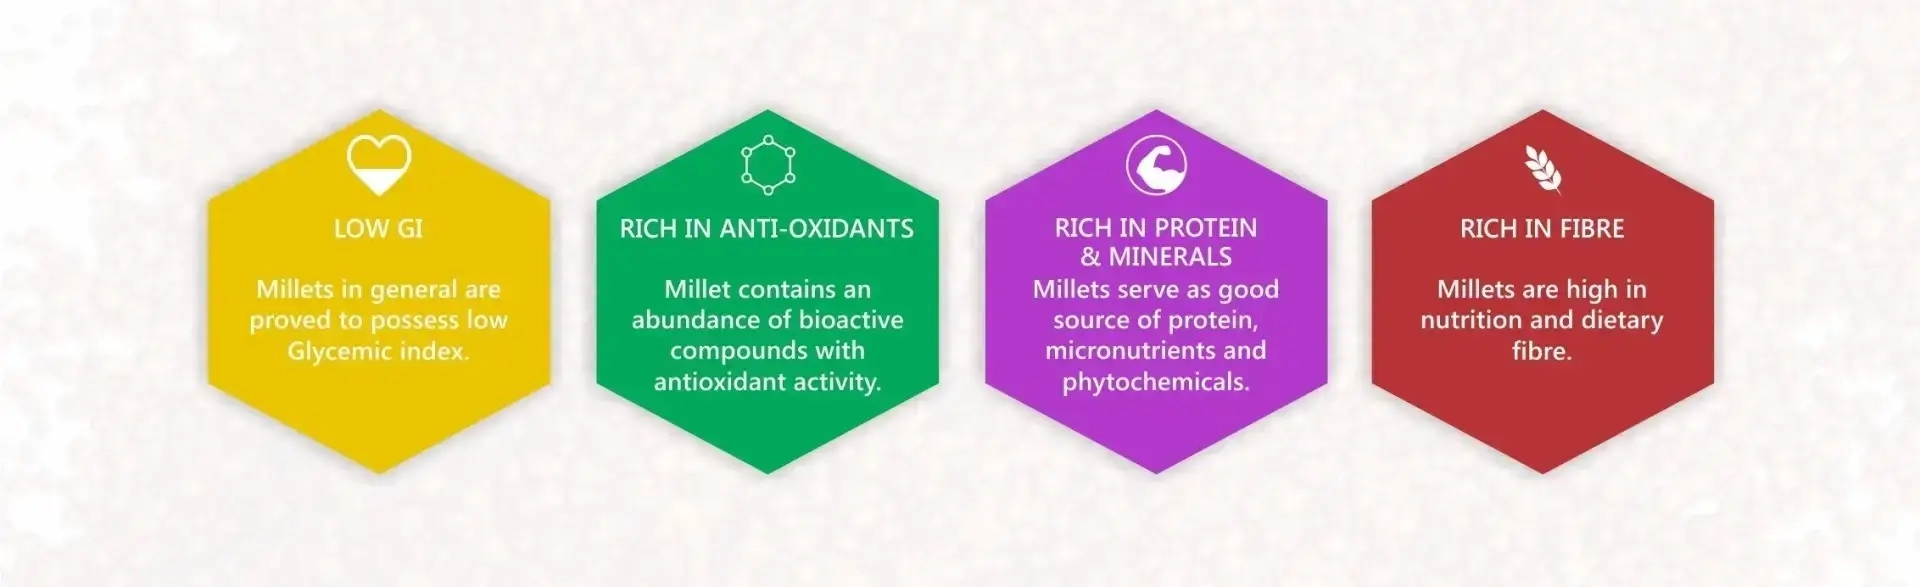 Millet Based Products